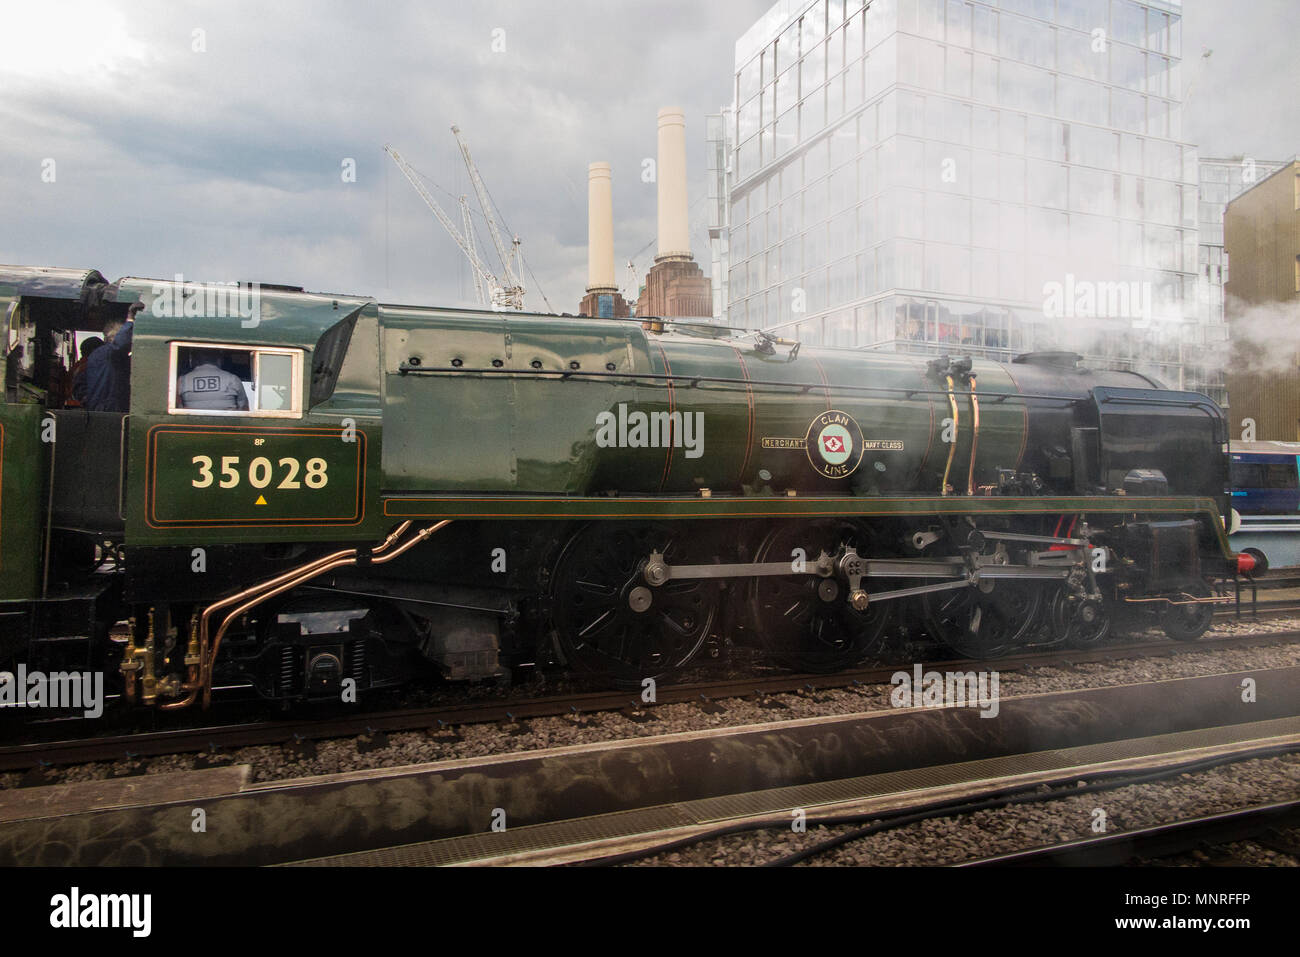 A steam engine locomotive  on it's way past the iconic Battersea Power Station in Central London Stock Photo